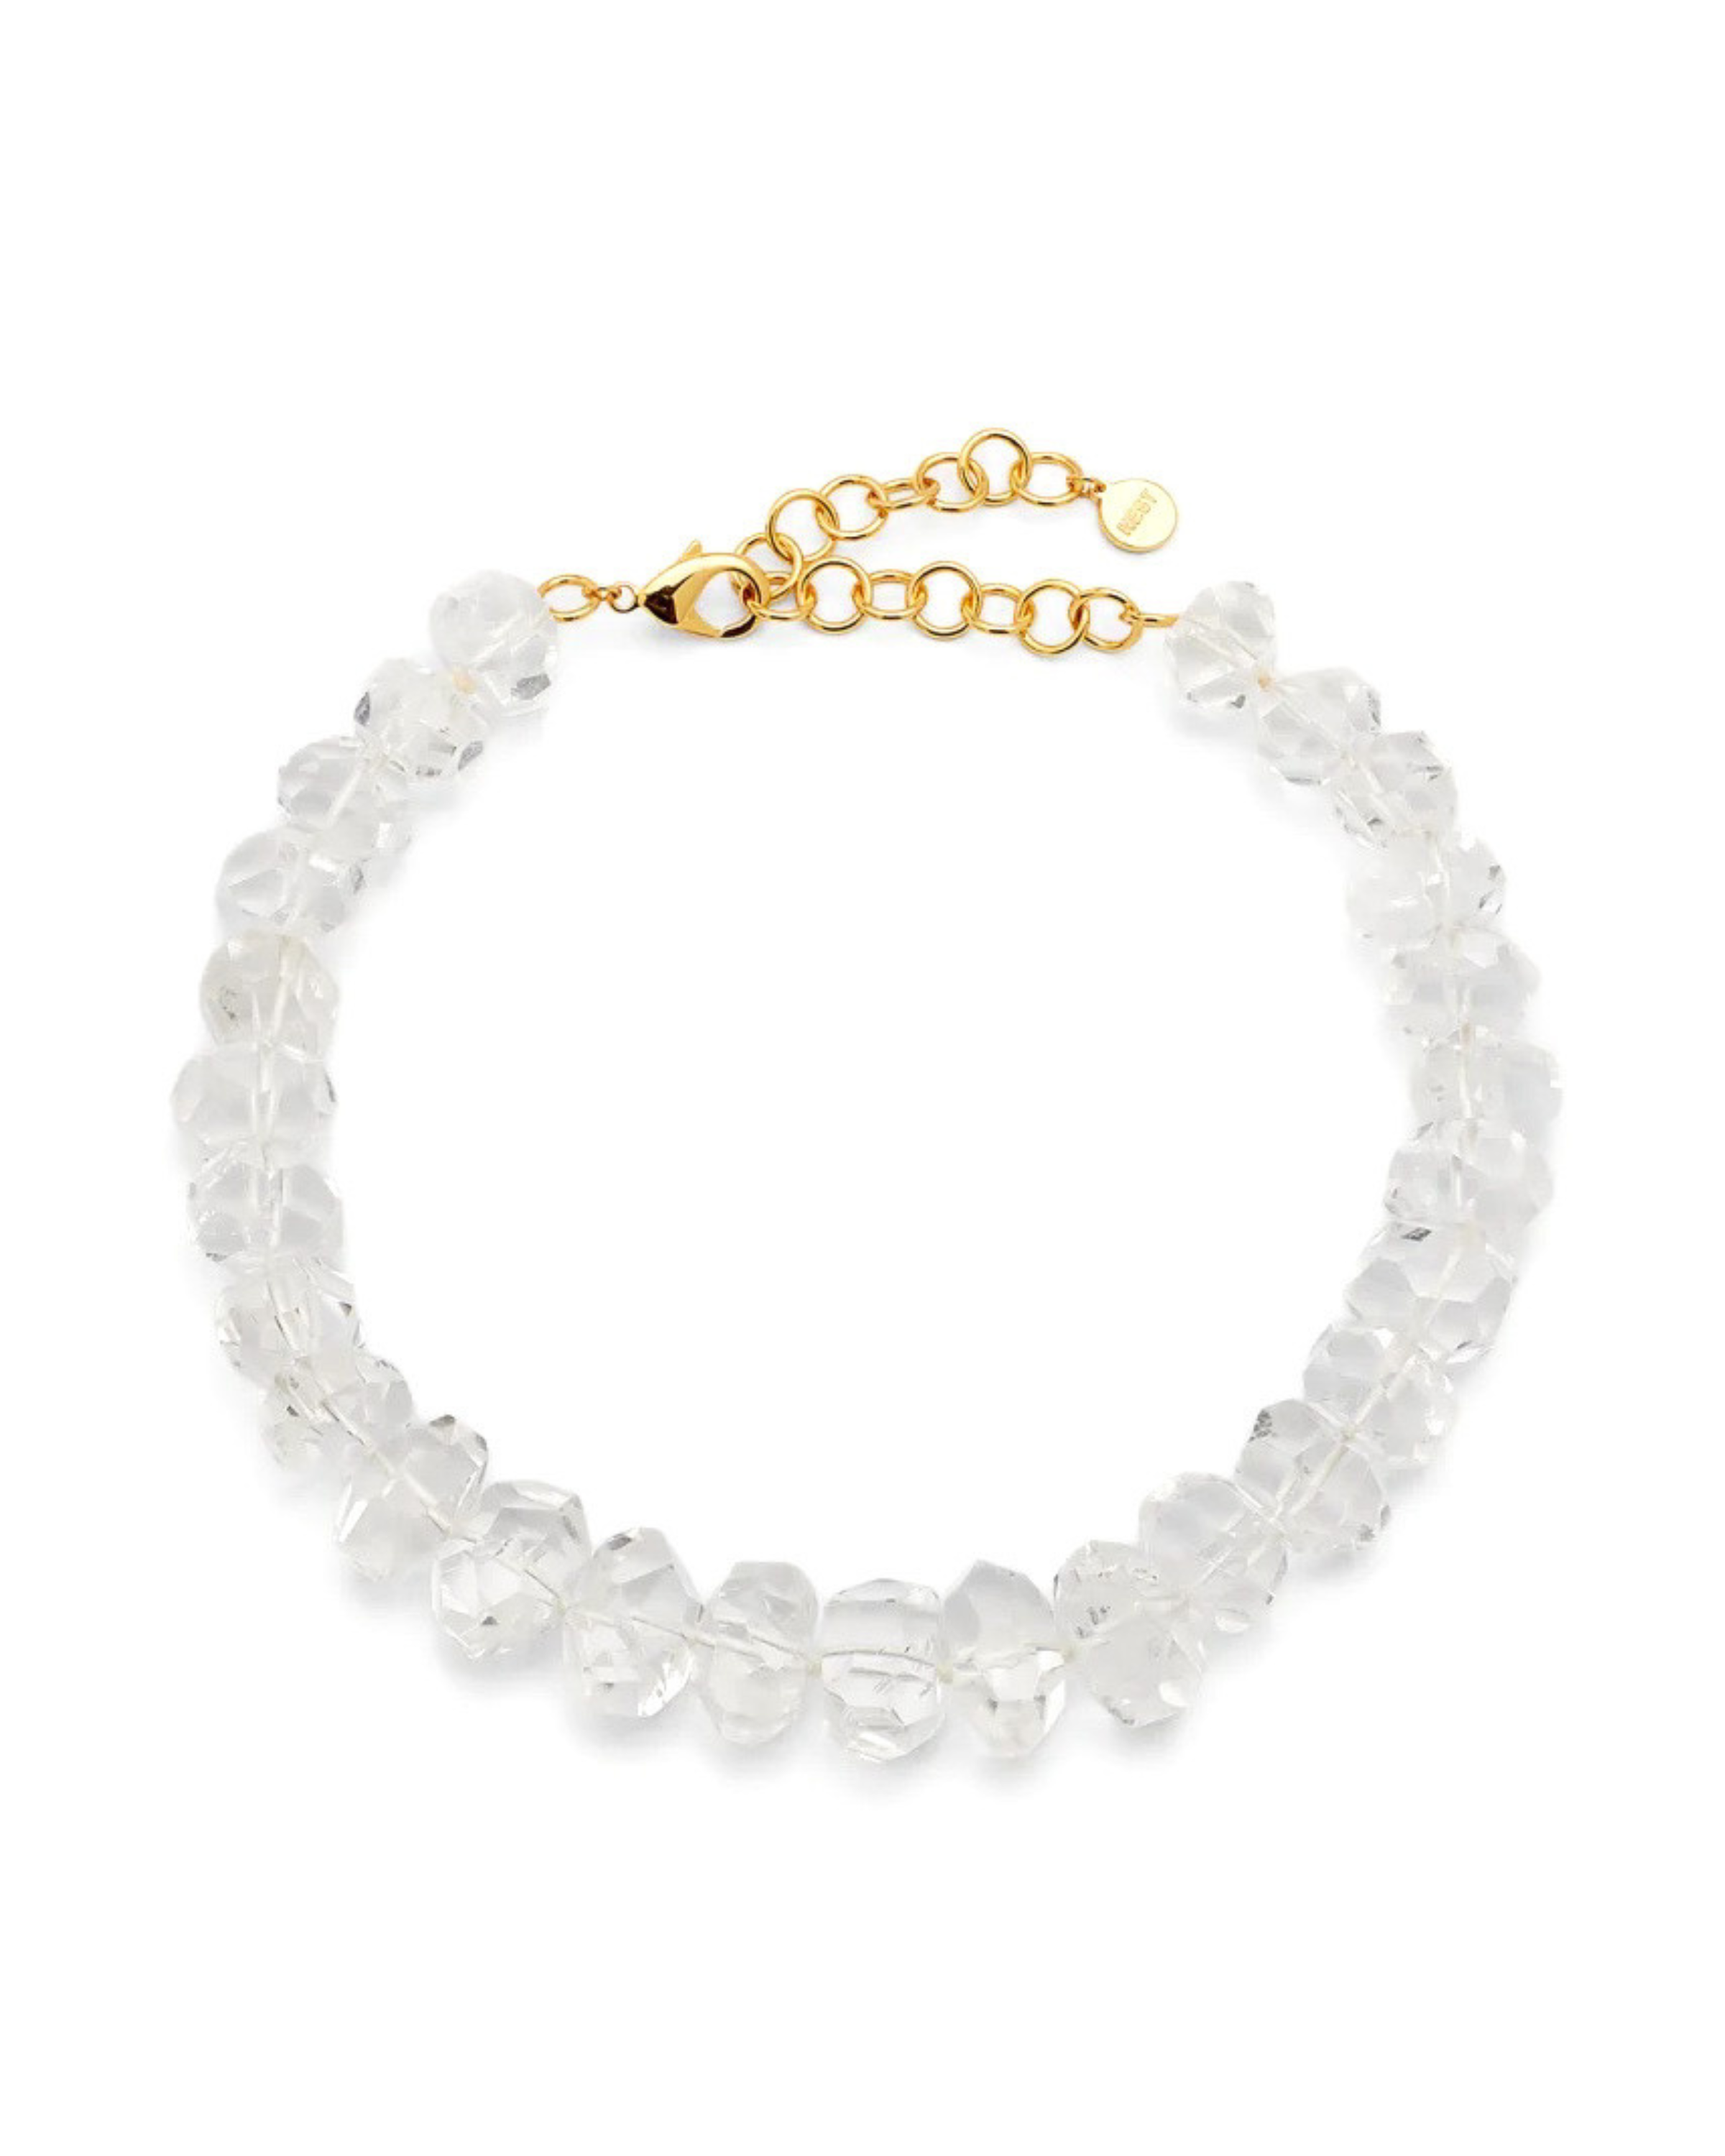 Faceted Crystal Statement Choker Necklace